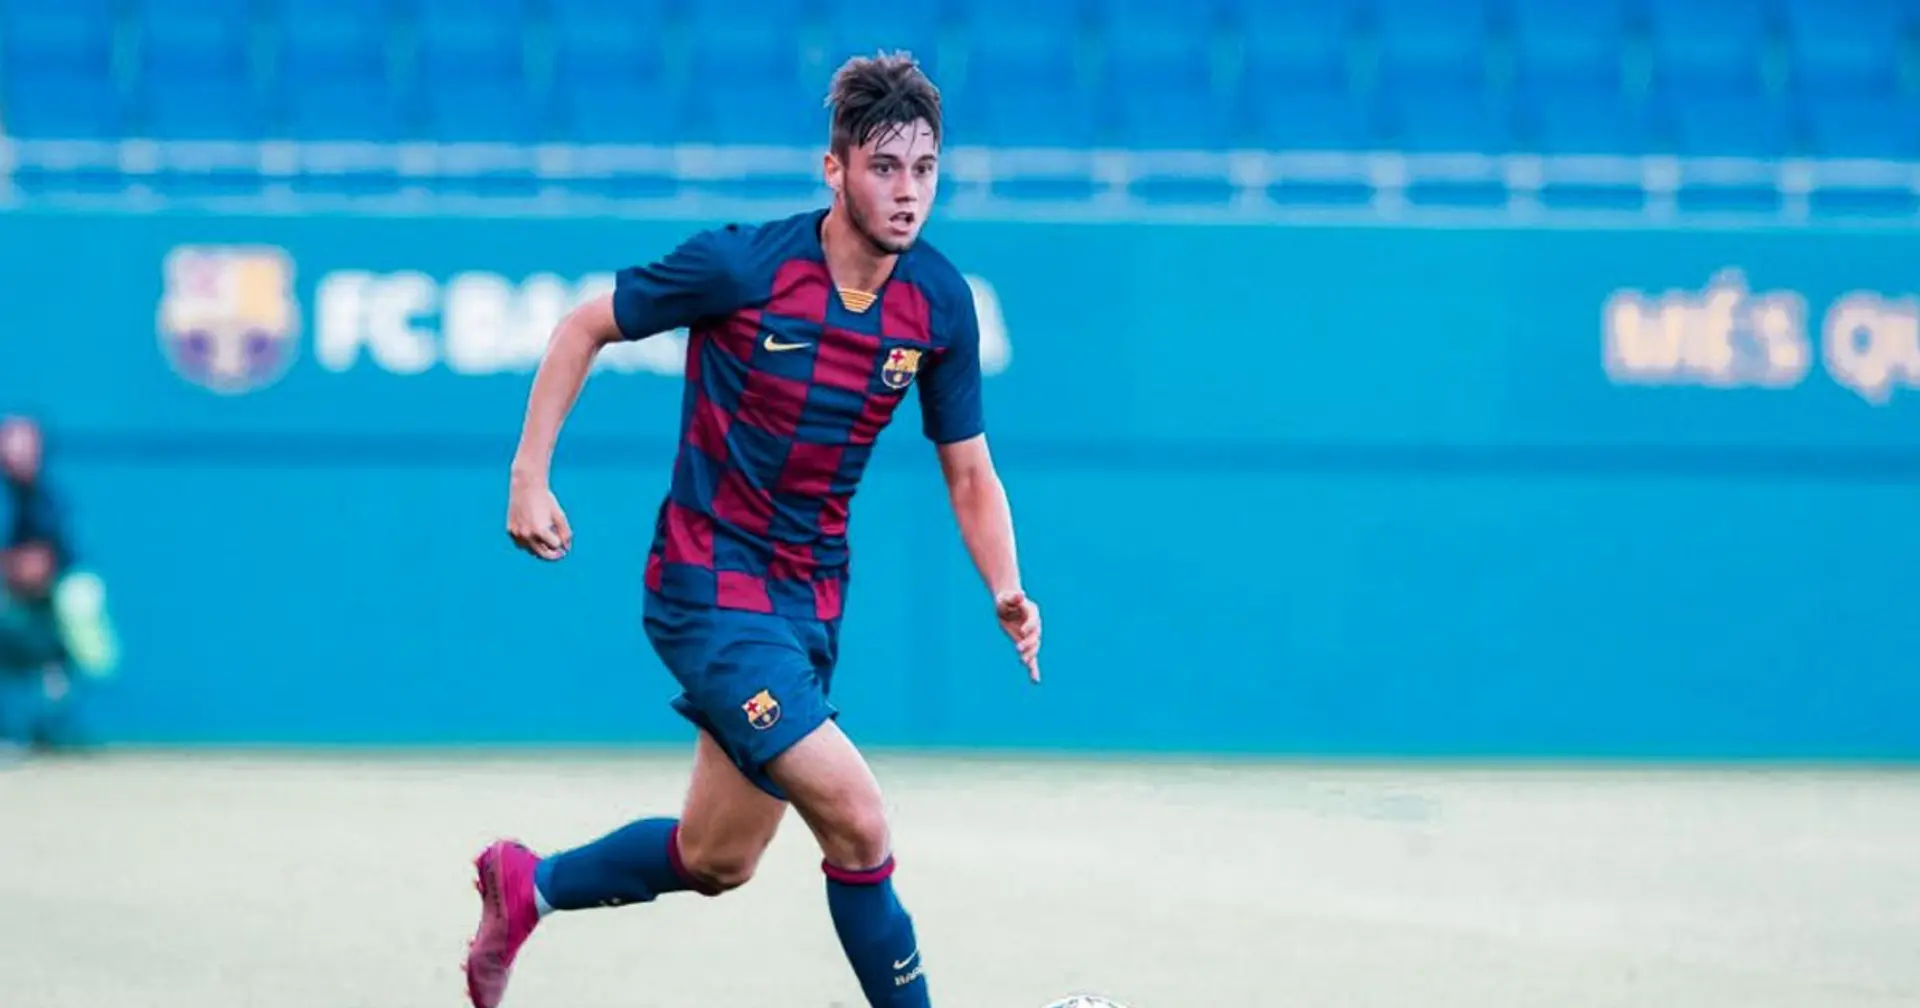 Barcelona lose highly-rated Academy forward Jaume Jardi to Real Madrid (reliability: 4 stars)